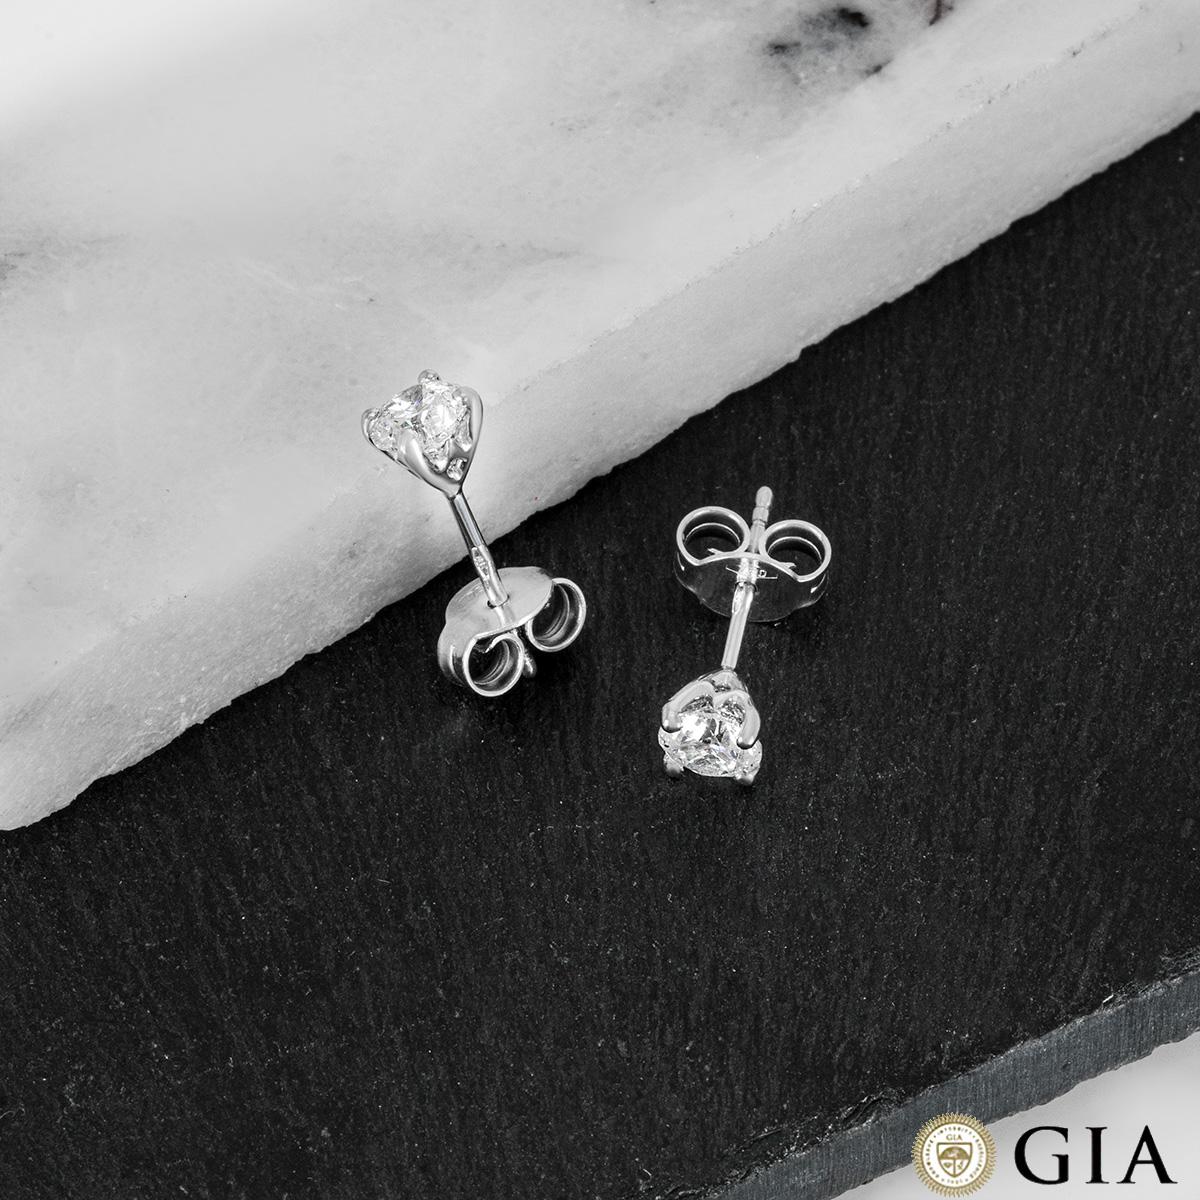 GIA Certified White Gold Round Brilliant Cut Diamond Earrings 0.80 Carat TDW For Sale 4